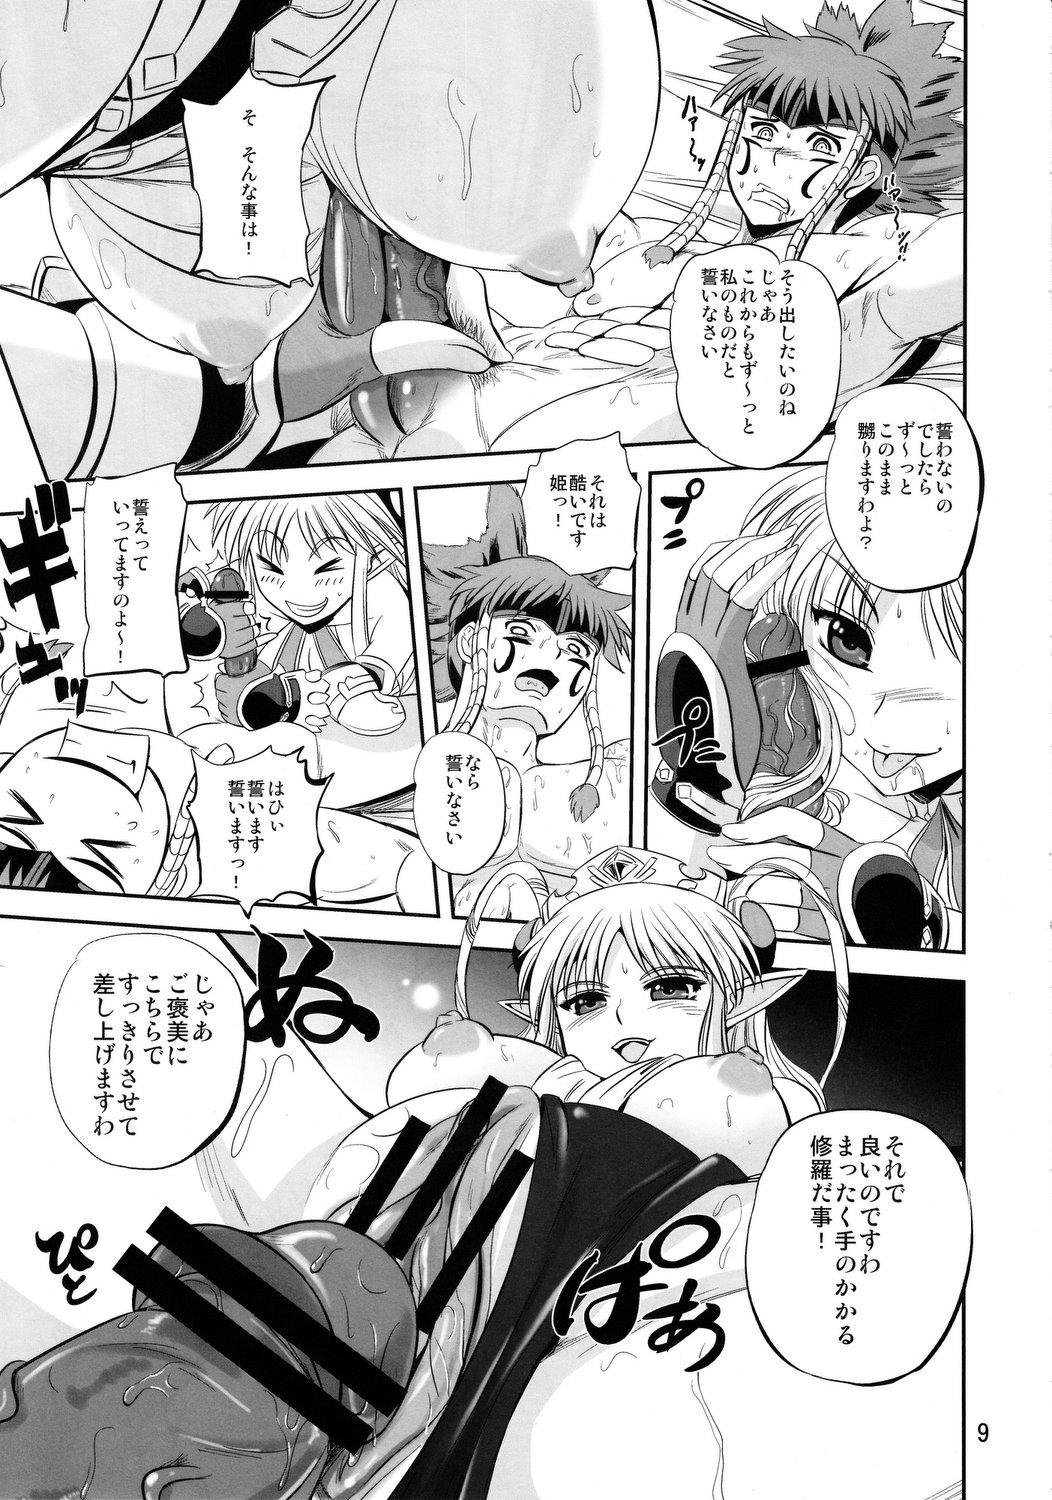 Wives Royal DoS Breaker - Super robot wars Endless frontier Barely 18 Porn - Page 8